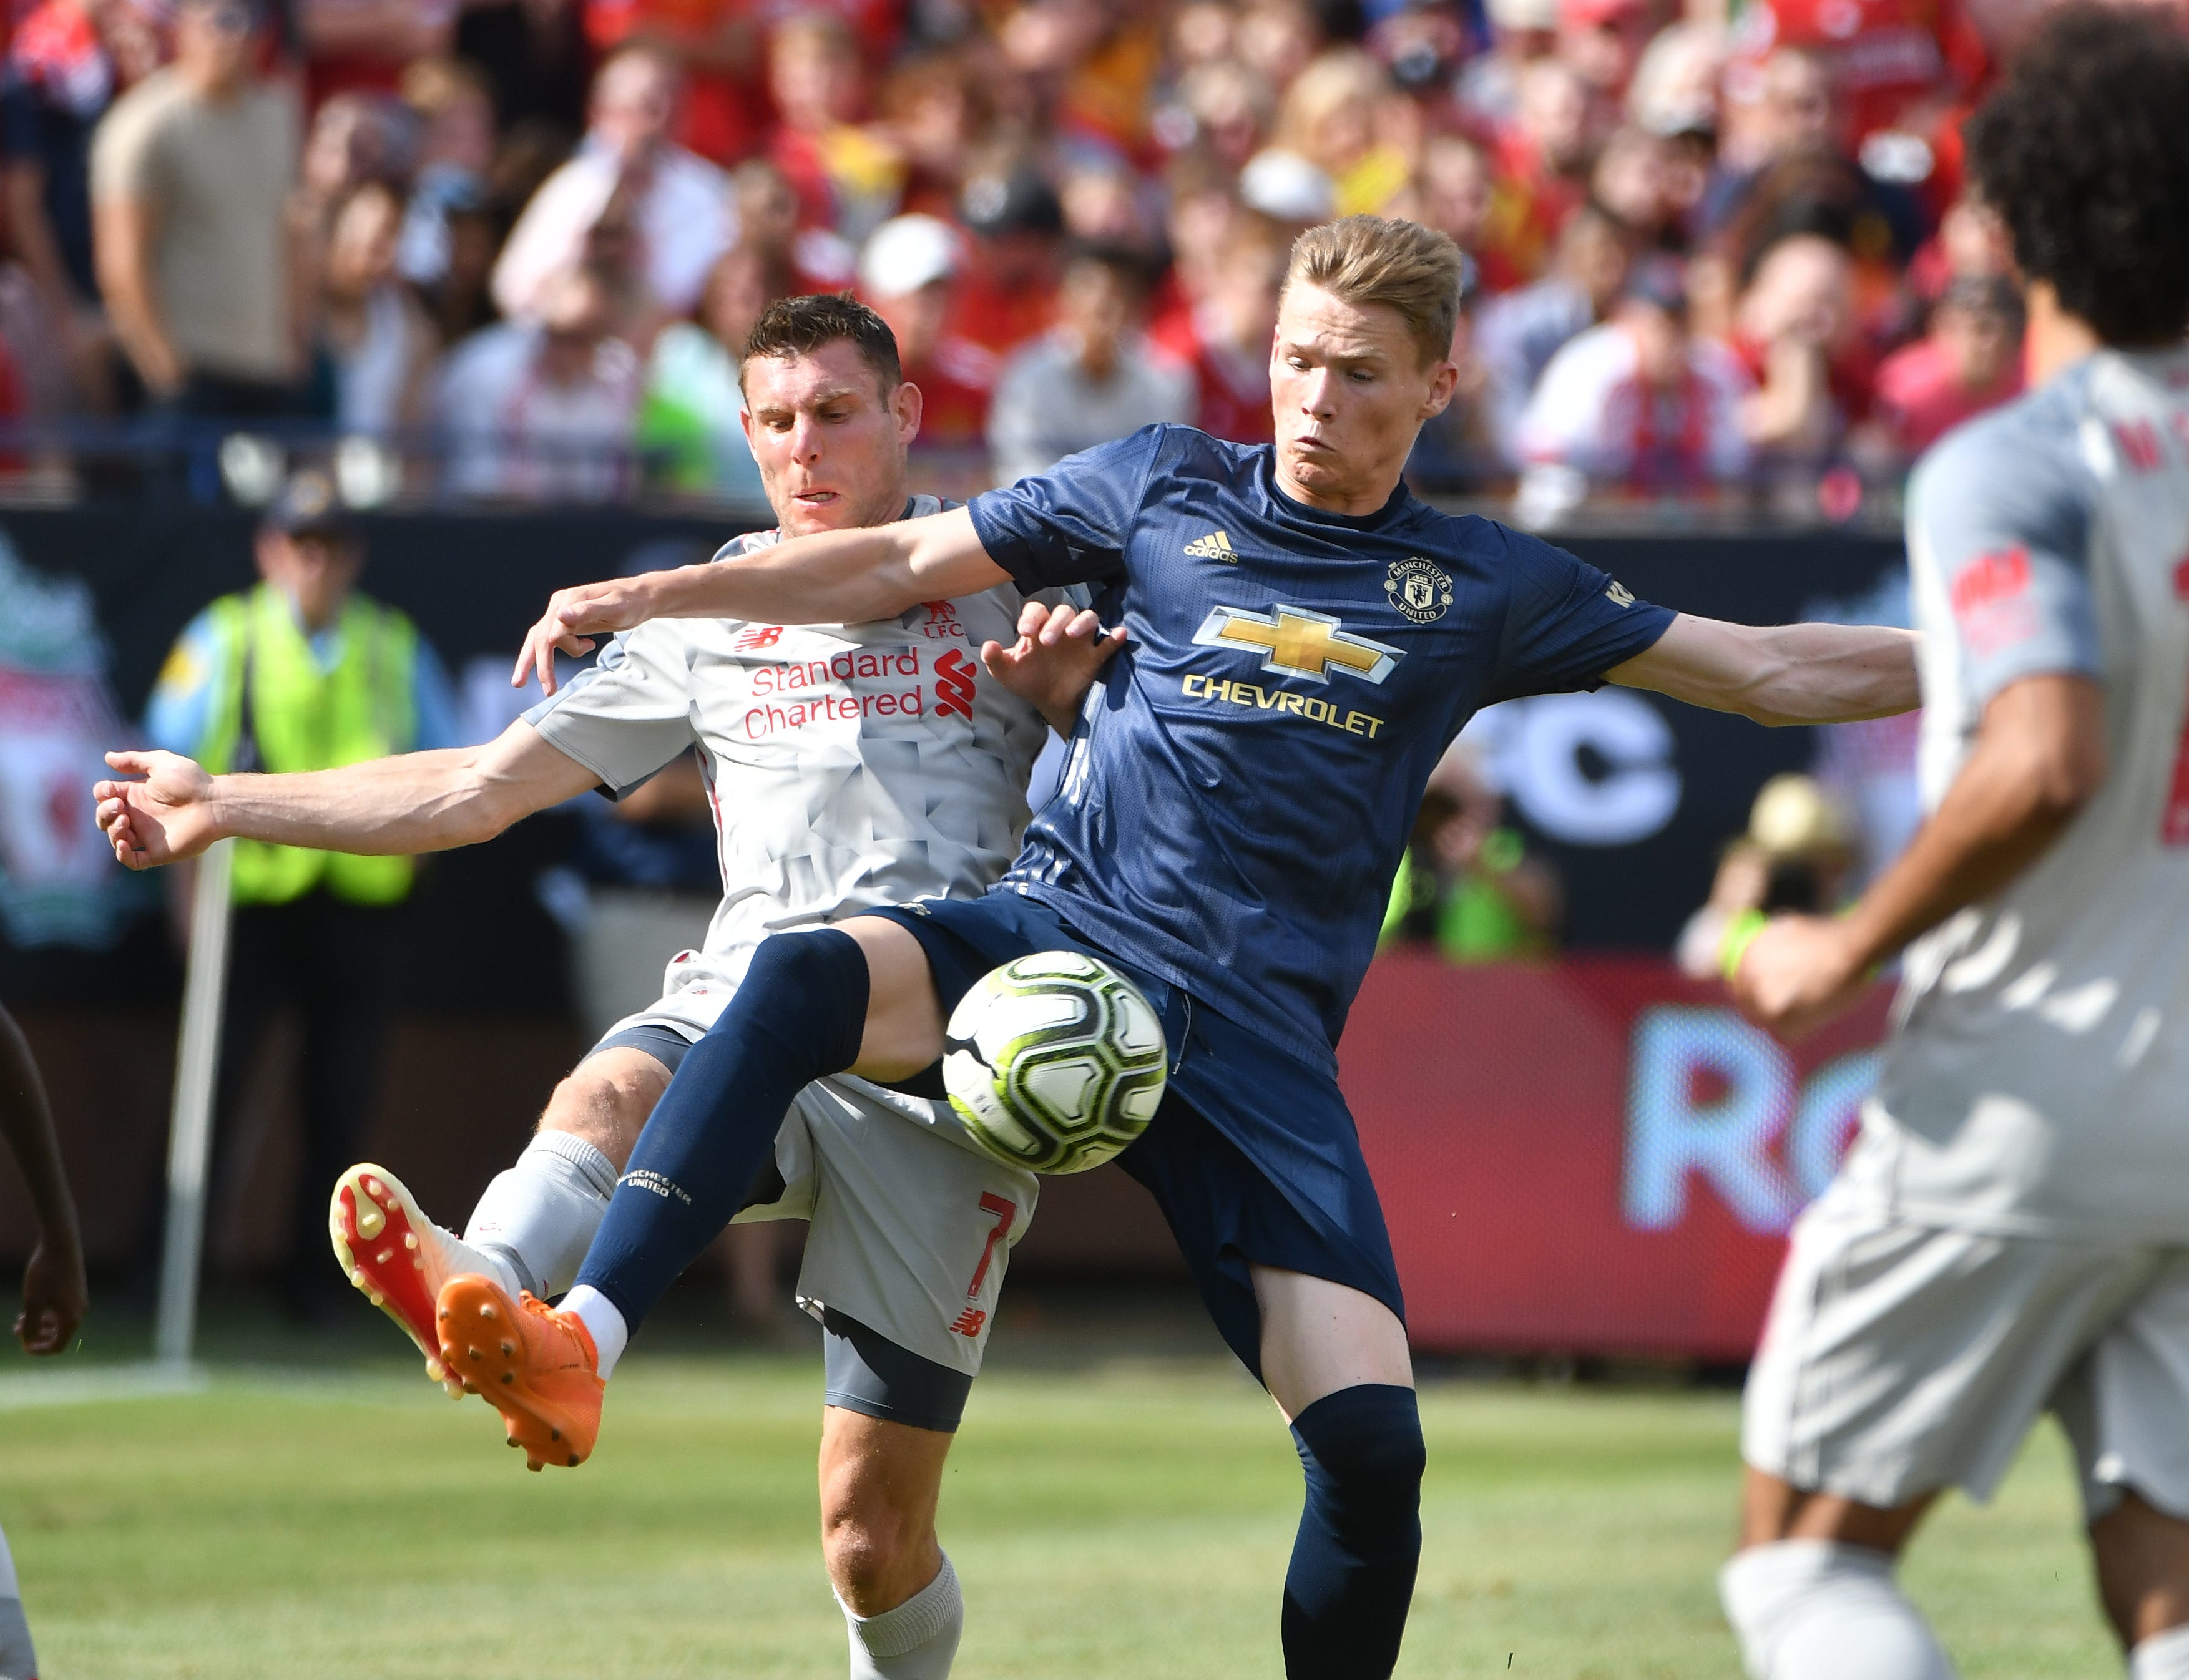 Liverpool's James Milner and Manchester's Scott McTominay battle over a ball in the first half.